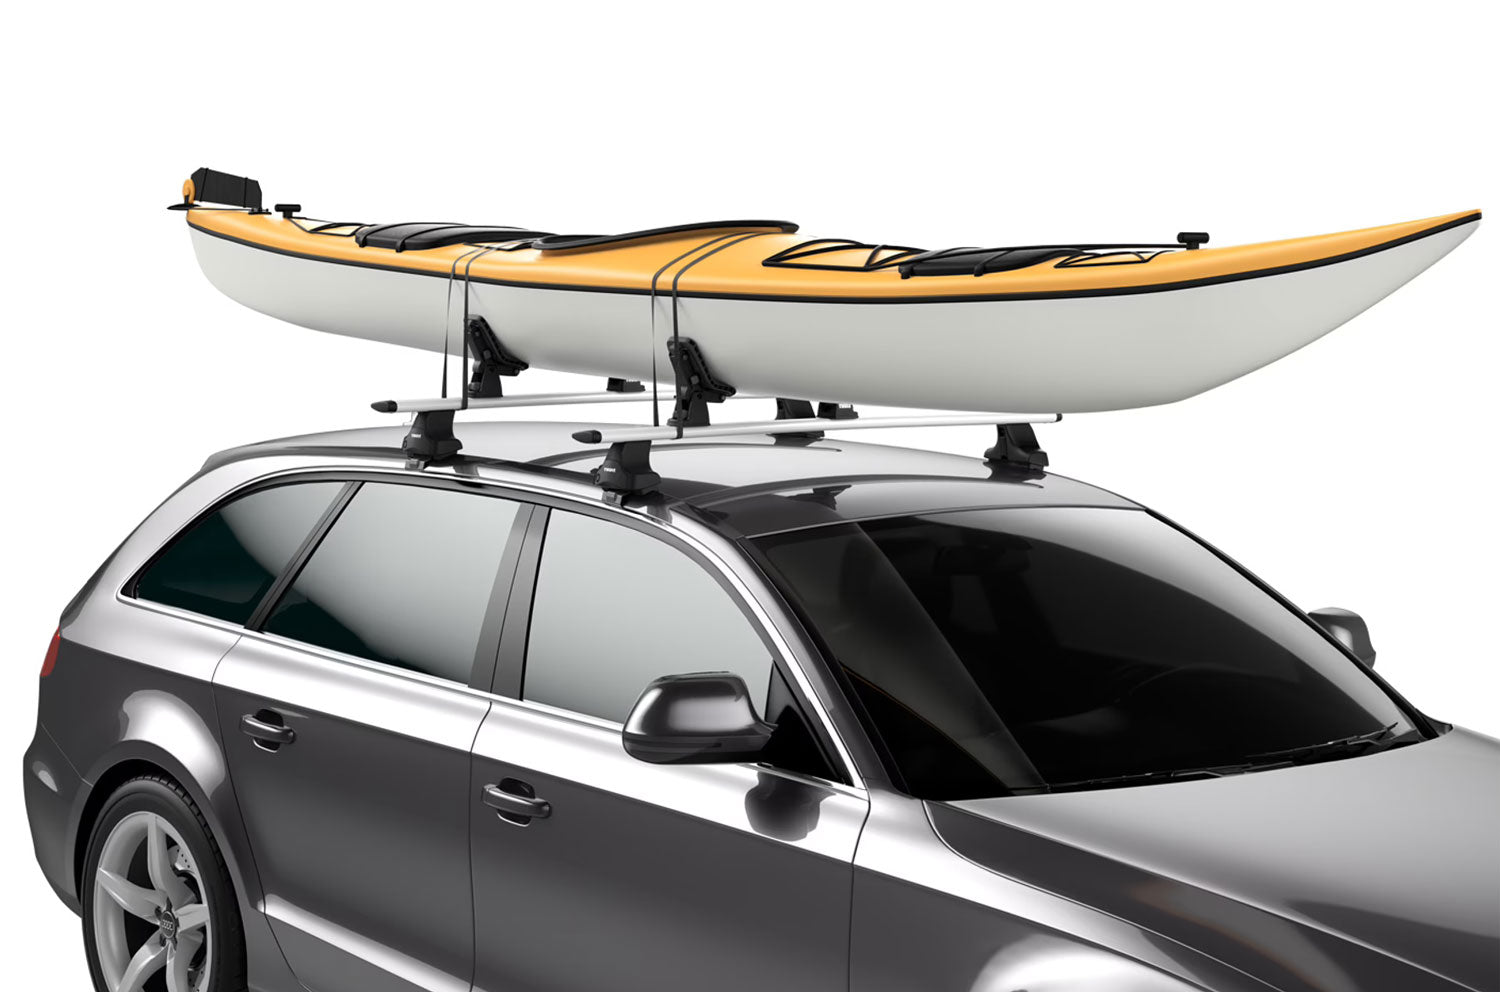 Thule Dockgrip in use with a akyak and the included straps